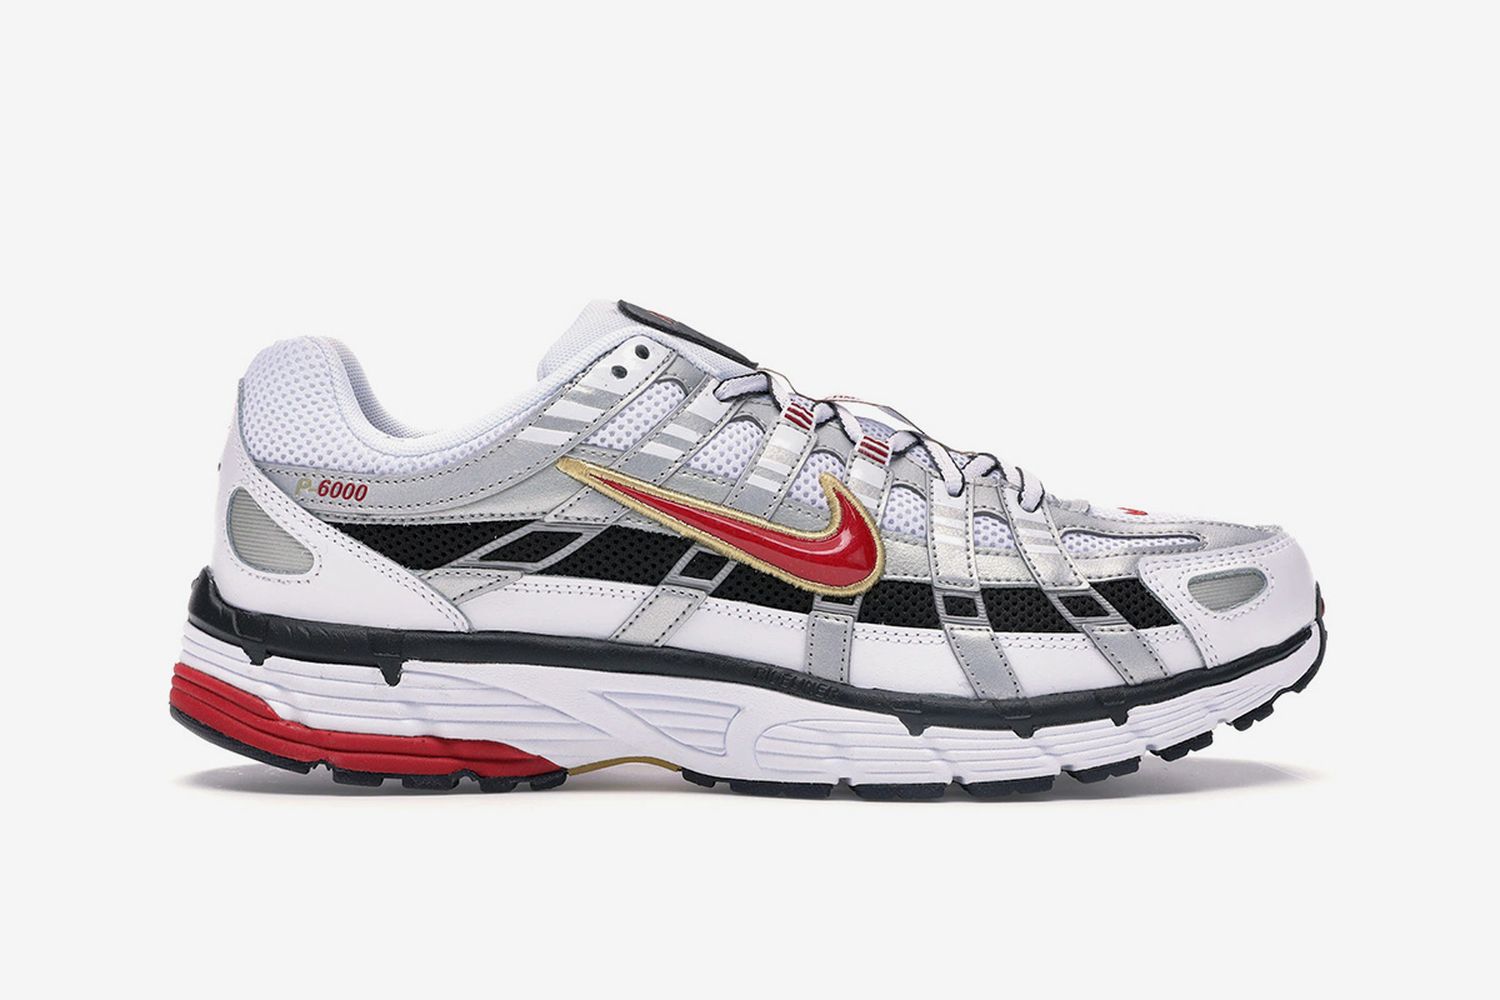 The Best Nike P-6000 Colorways to Cop Right Now